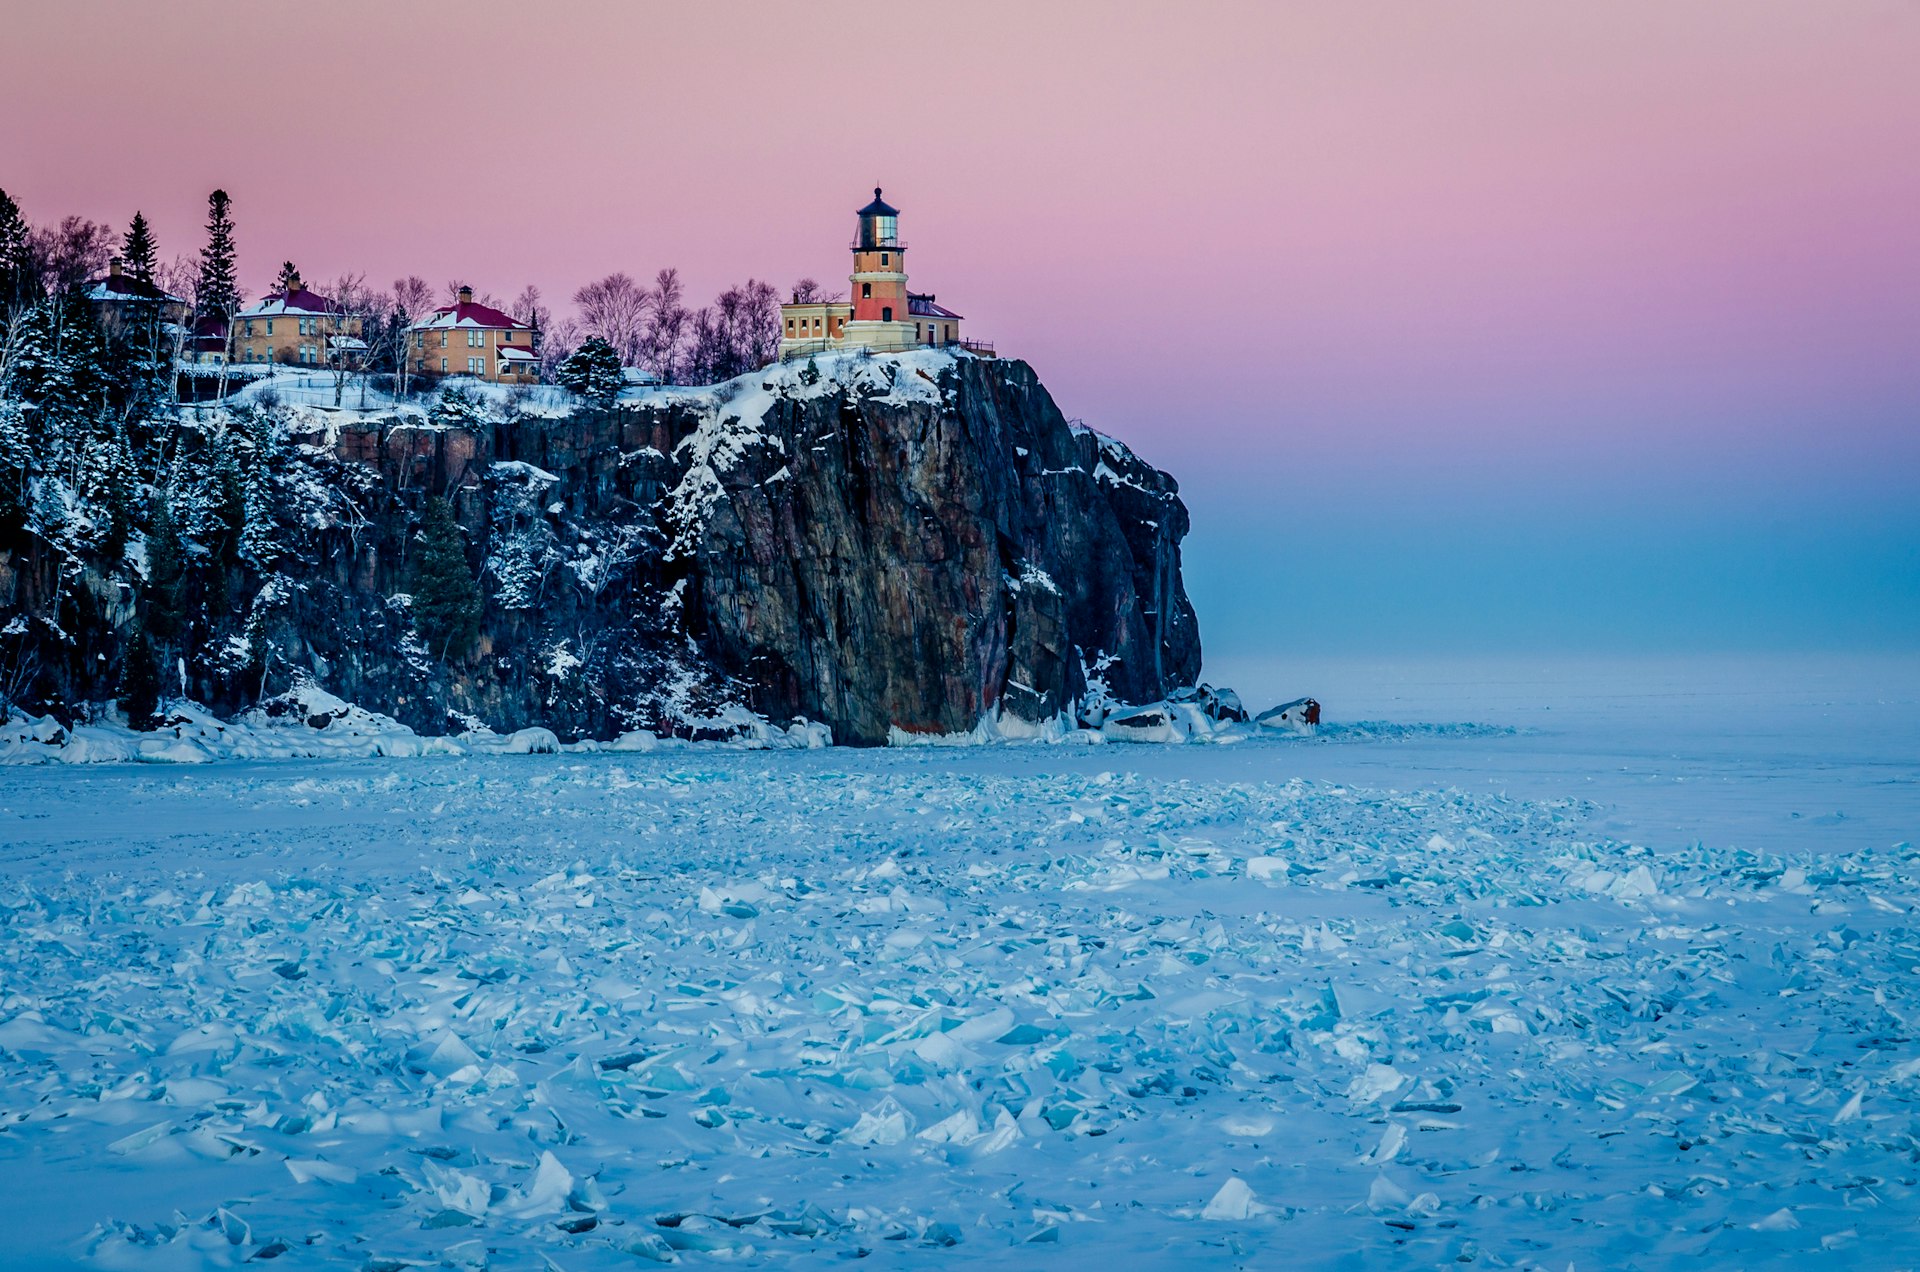 A lighthouse on the top of a rocky cliff glows pink the low sunlight. The lake below is frosty